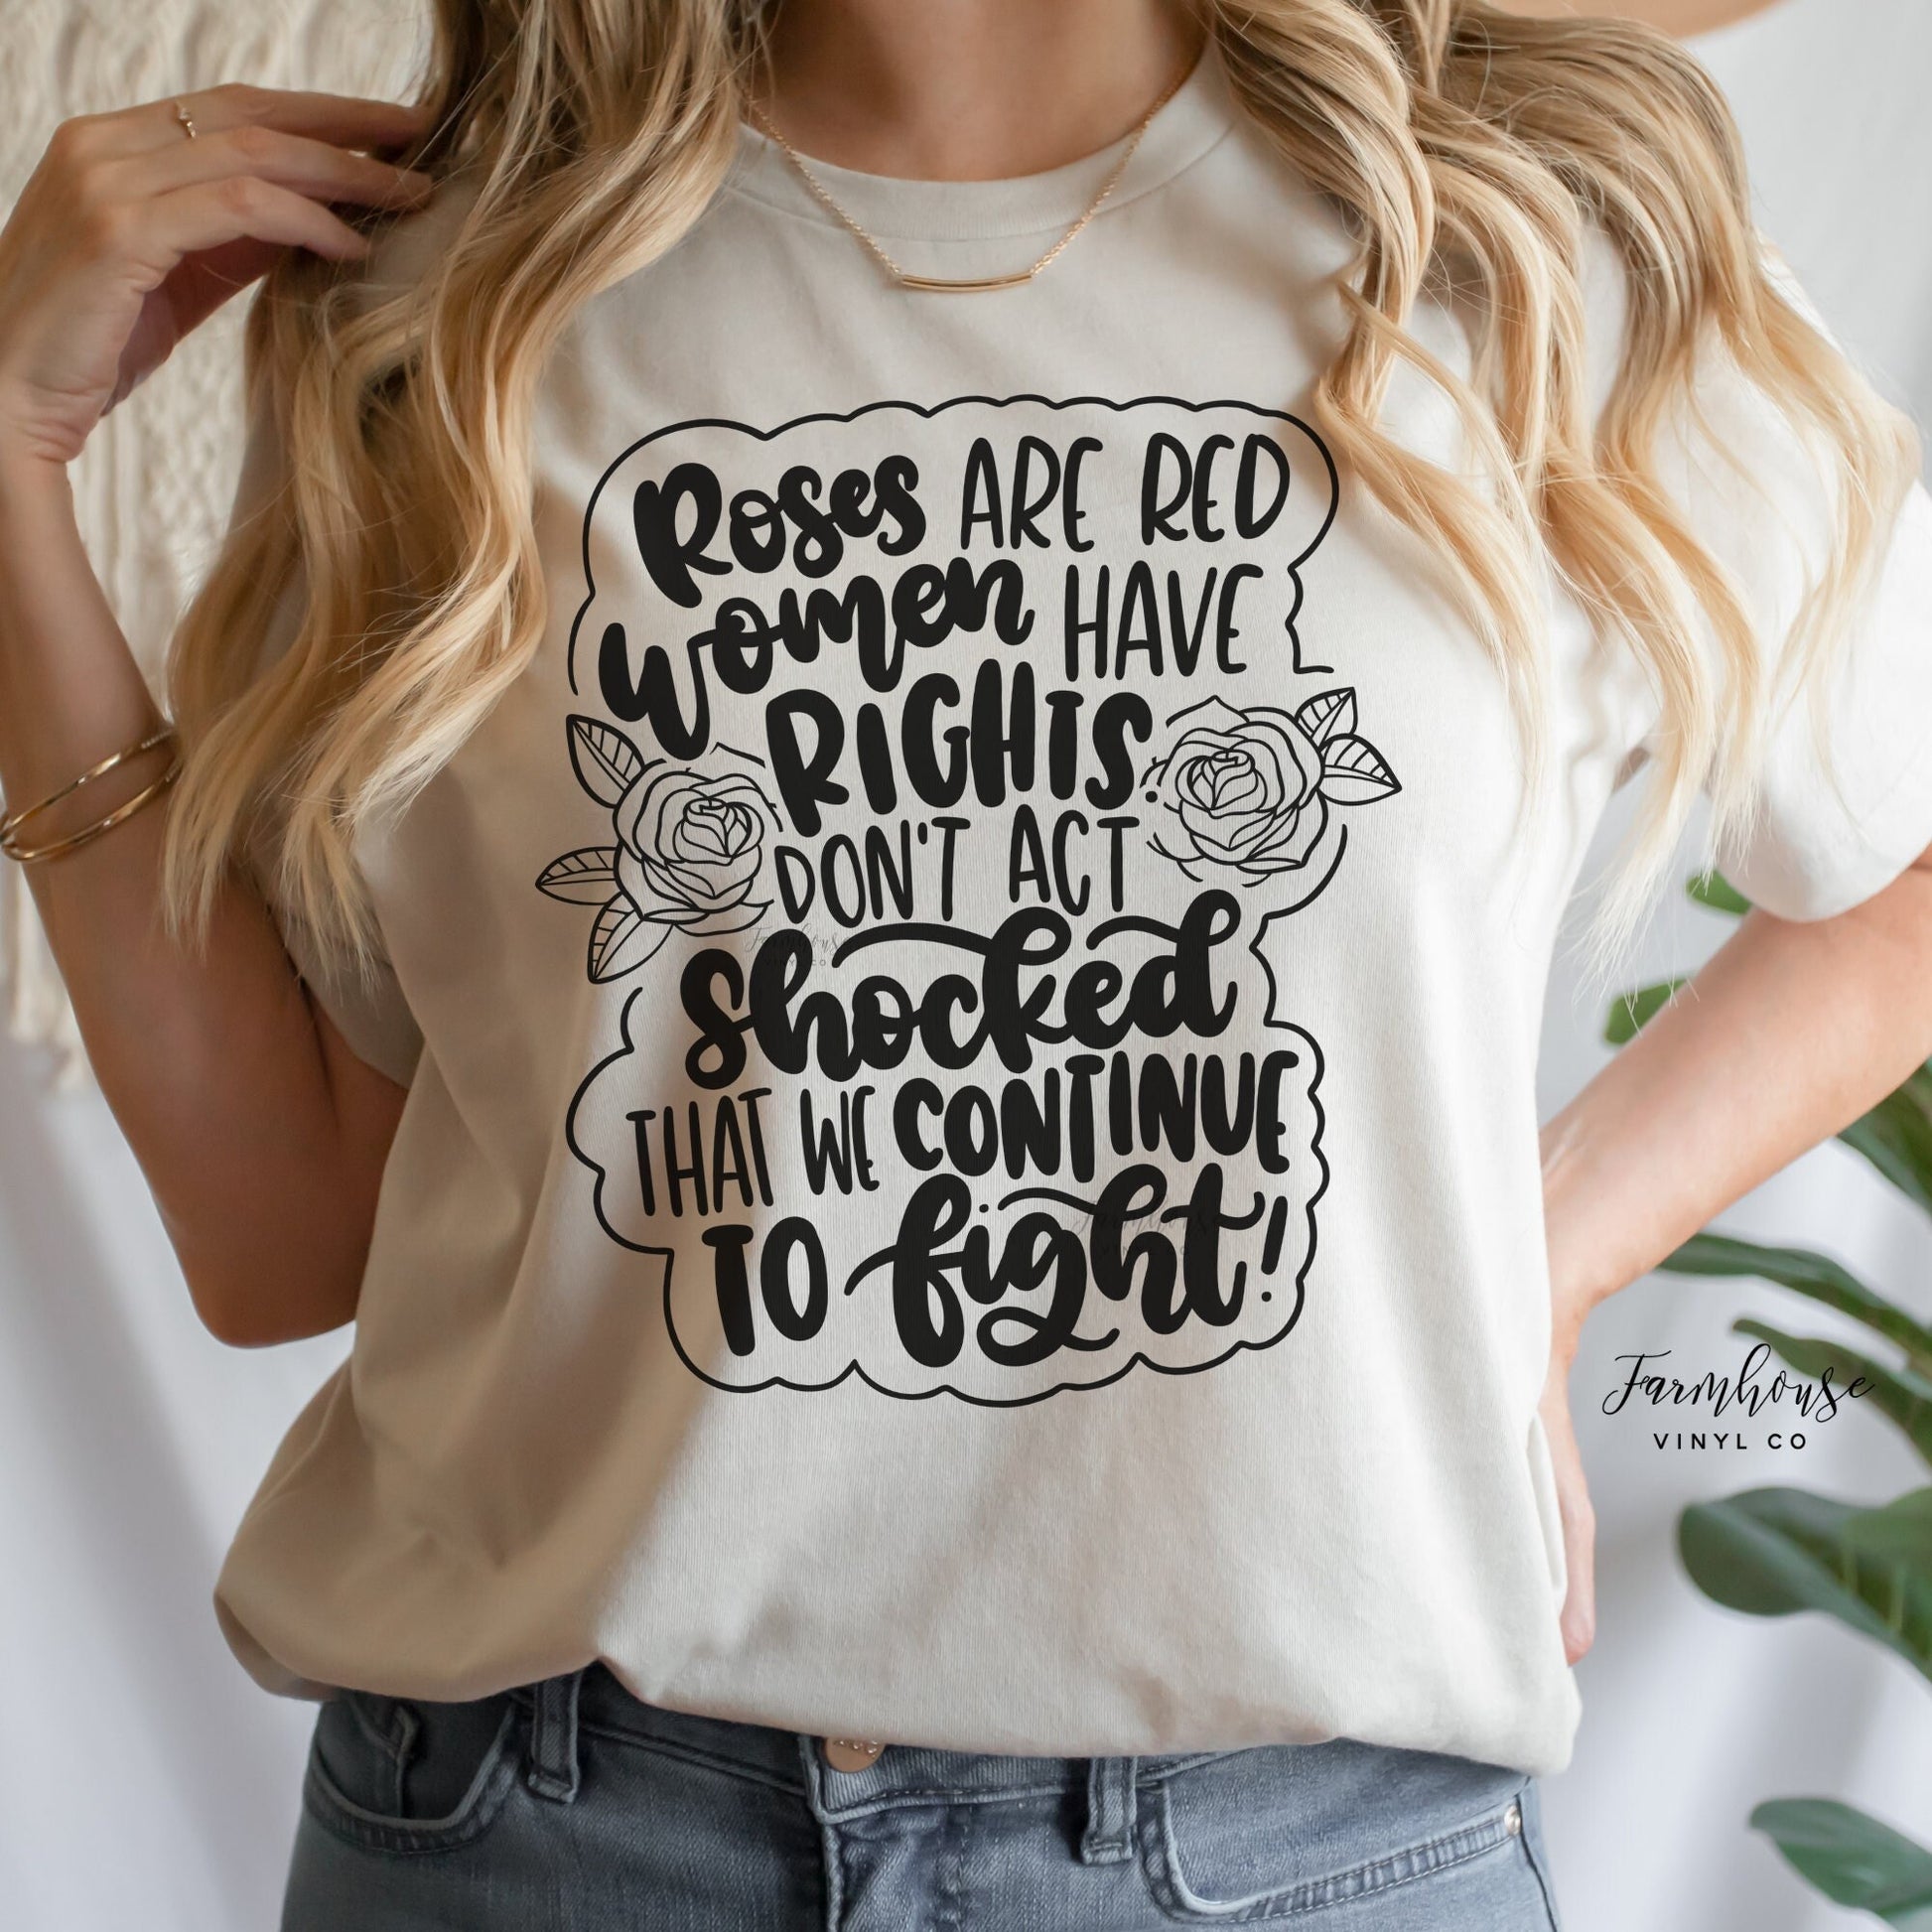 Roses Are Red Women Have Rights Shirt - Farmhouse Vinyl Co